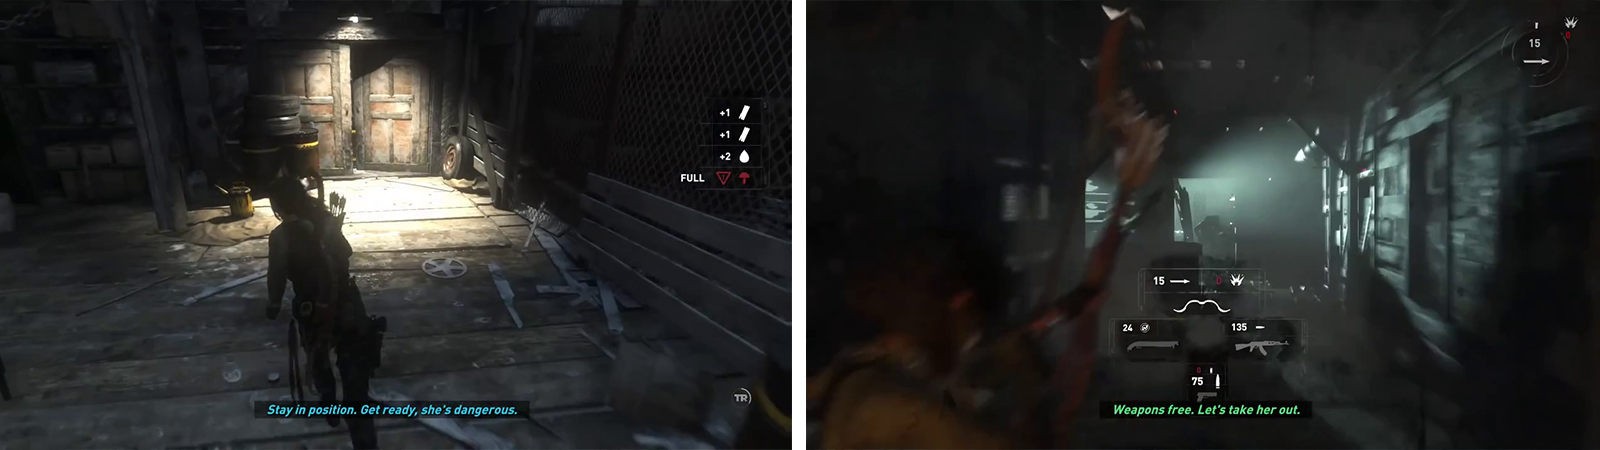 Enter the doorway behind the Base Camp when you are ready to continue (left). Fight your way through the building (right) until a scene plays.